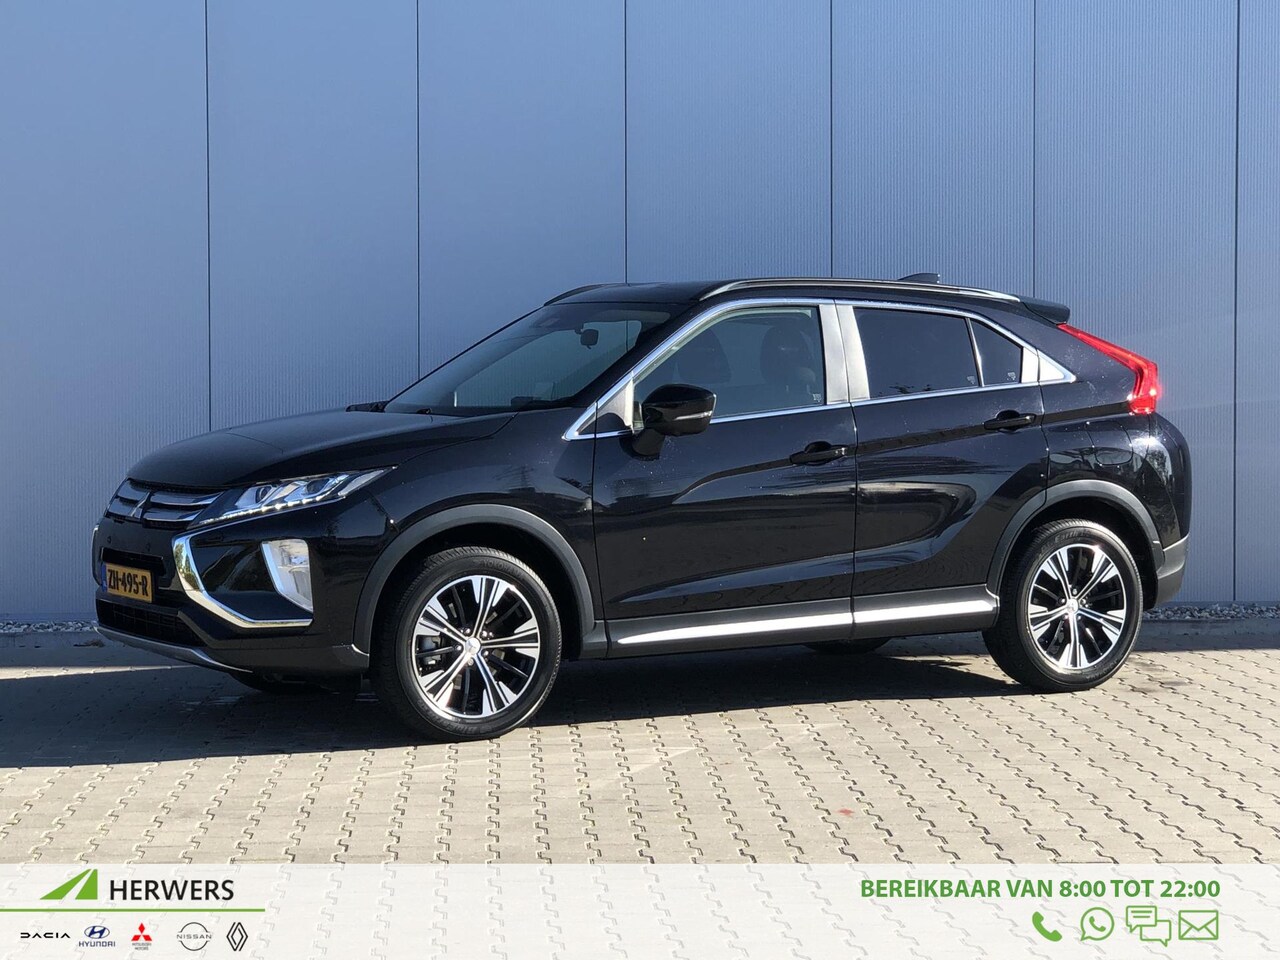 Mitsubishi Eclipse Cross - 1.5 DI-T First Edition / Apple & Android Carplay / Cruise Control / Climate Control / Came - AutoWereld.nl